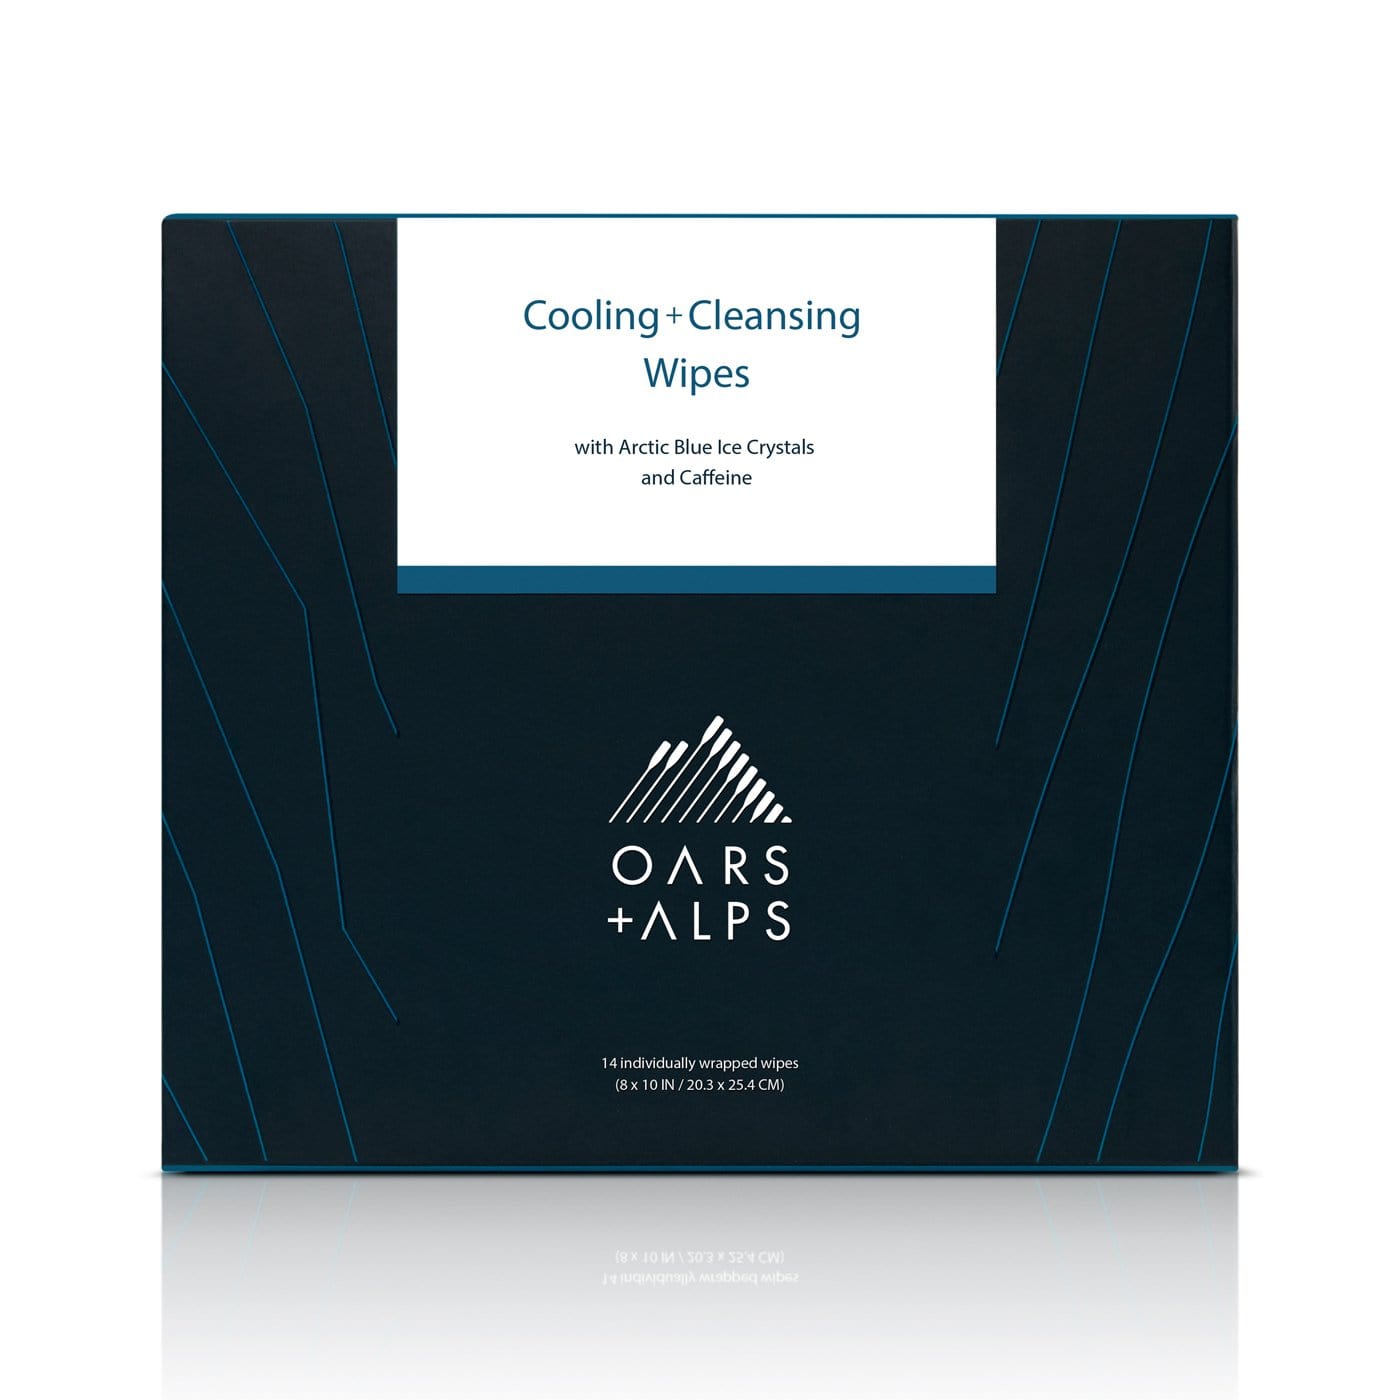 Cooling + Cleansing Wipes